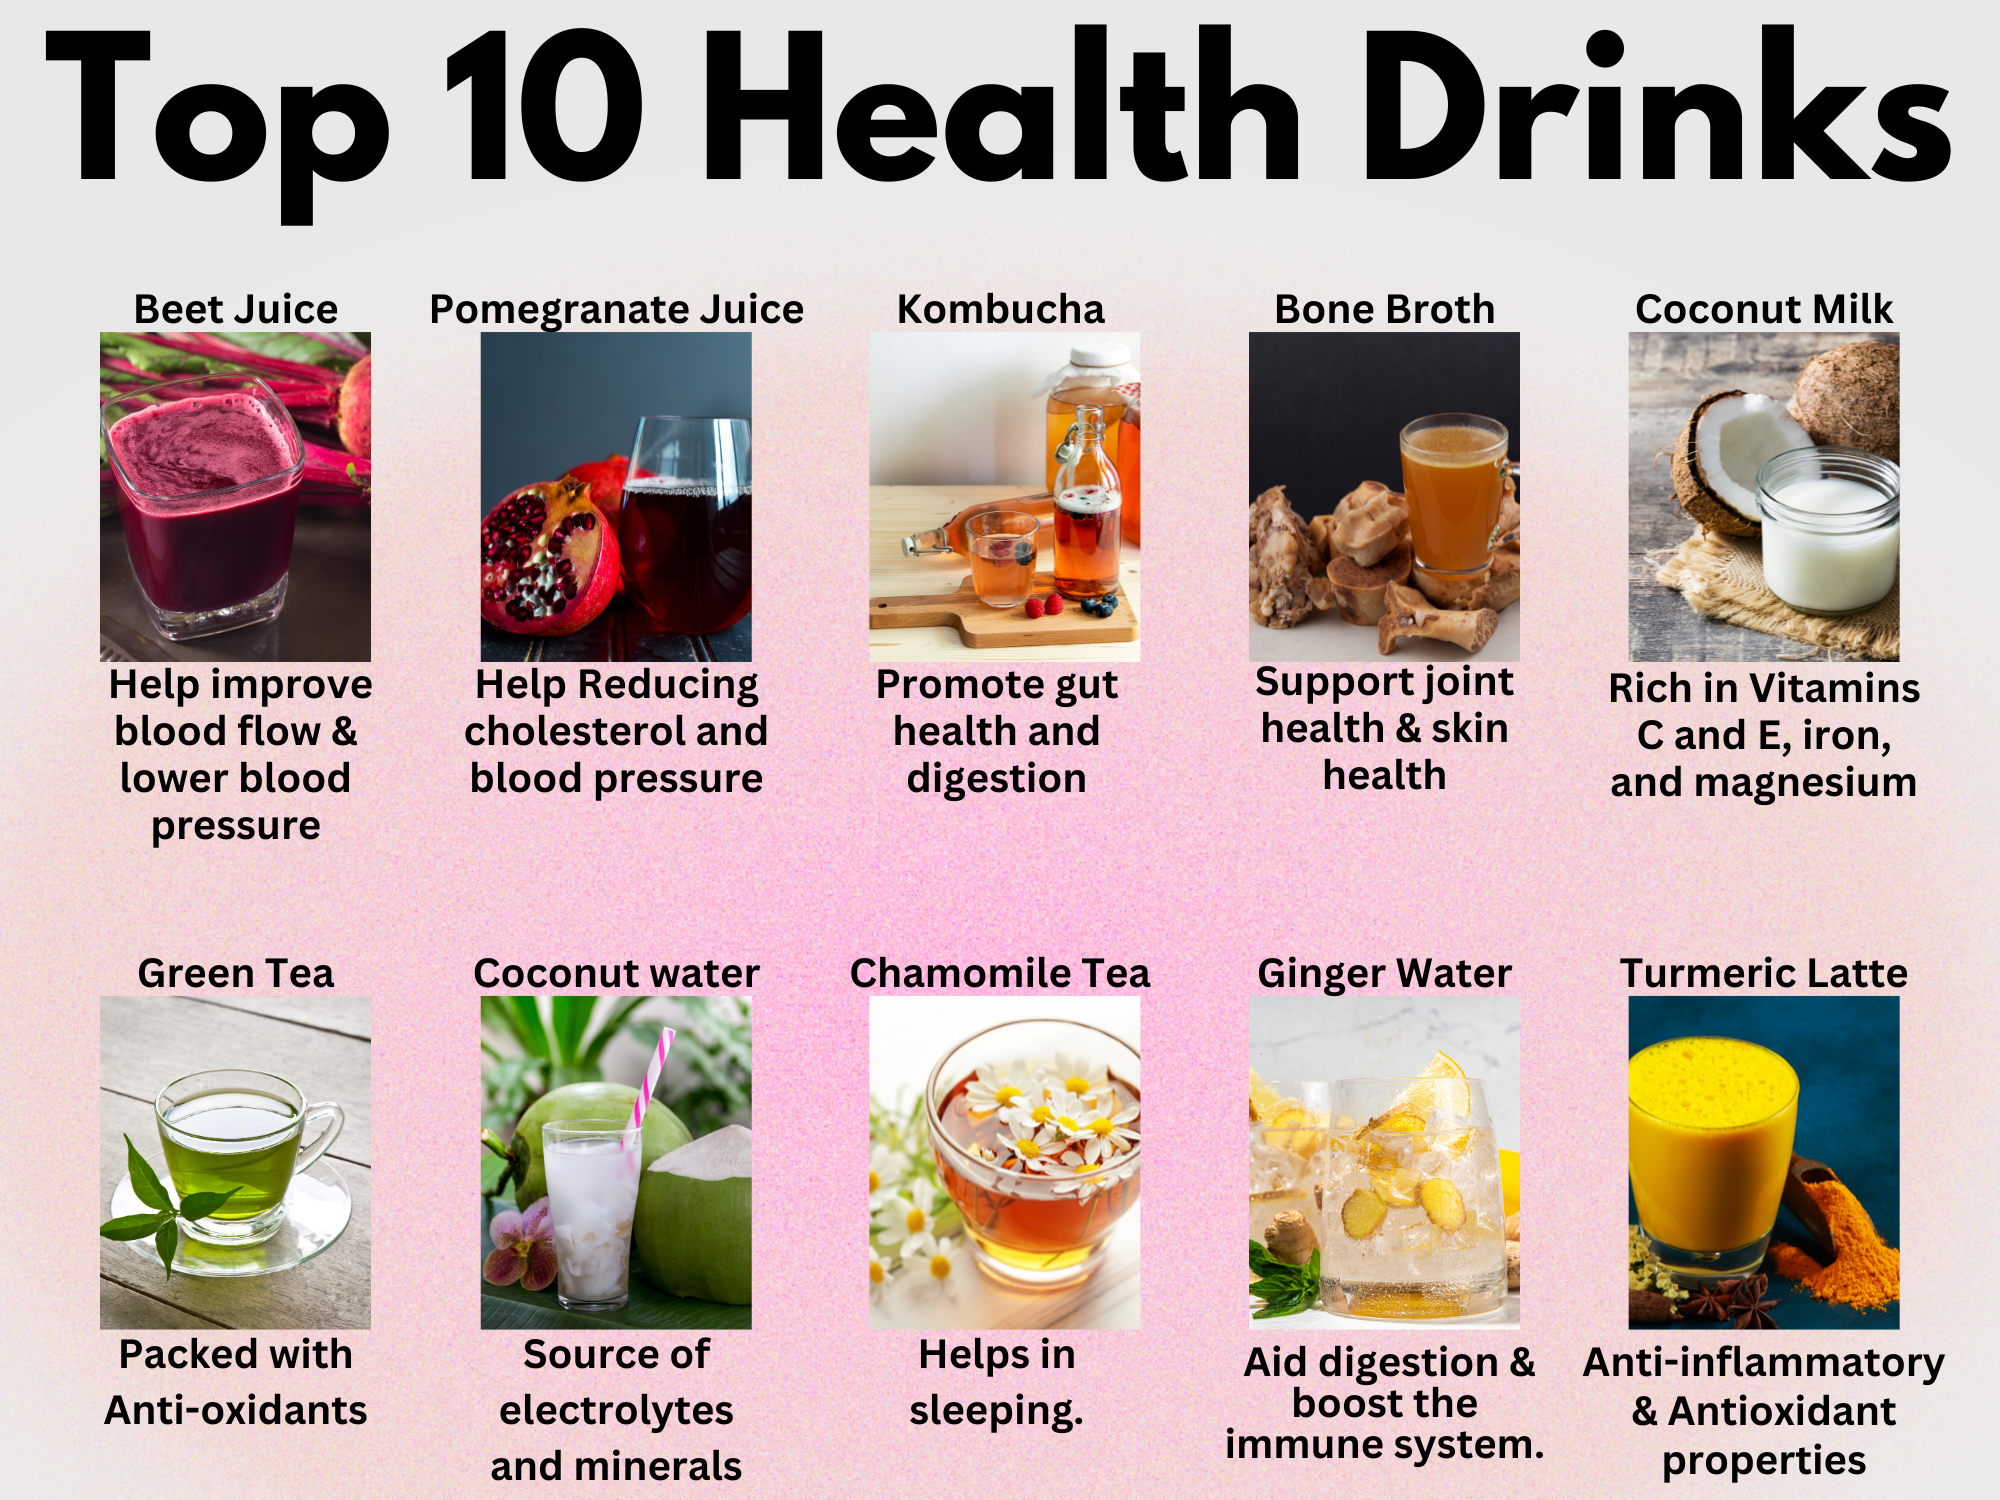 Top 10 health drinks and their benefits.